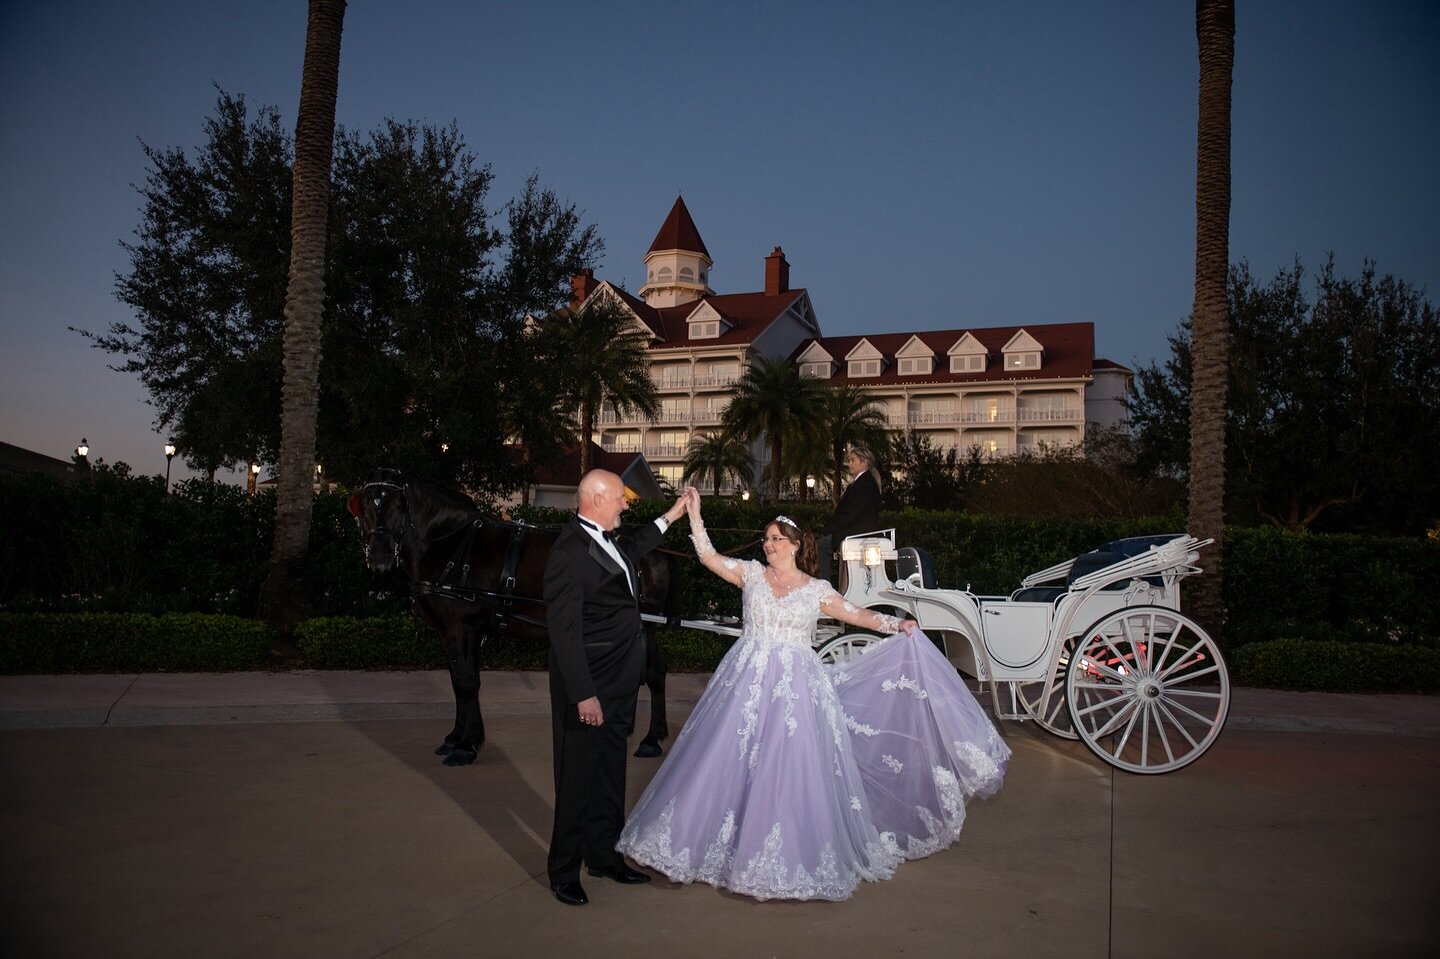 Weddings are some of our favorite projects to work on ✨ especially @disneyweddings 💜 
.
. 
#disney #disneywedding #disneyweddings #disneystyle #disneybride #disneyworld #grandfloridian #wedding #weddingphotography #weddingphotographer #weddingideas 